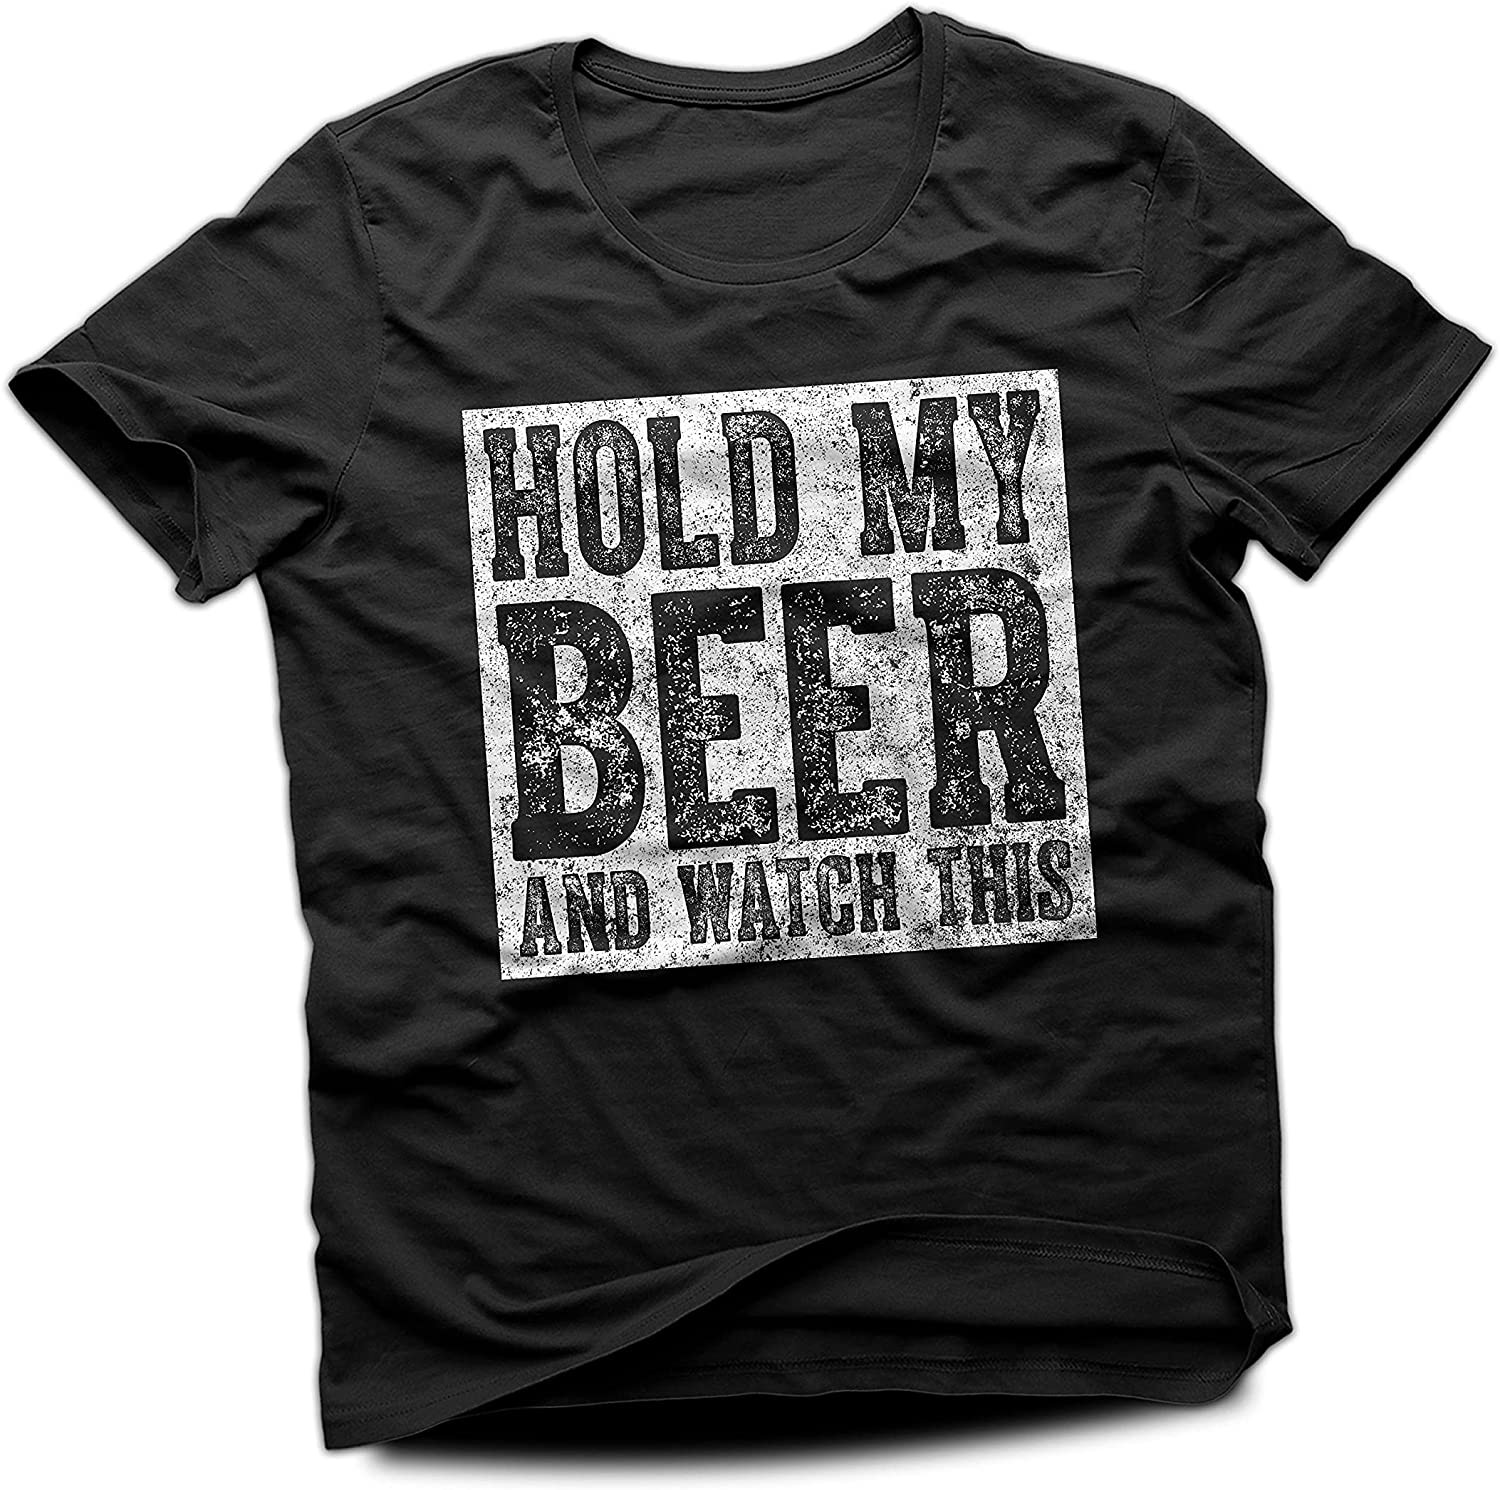 MugHold My Beer And Watch This T-Shirt